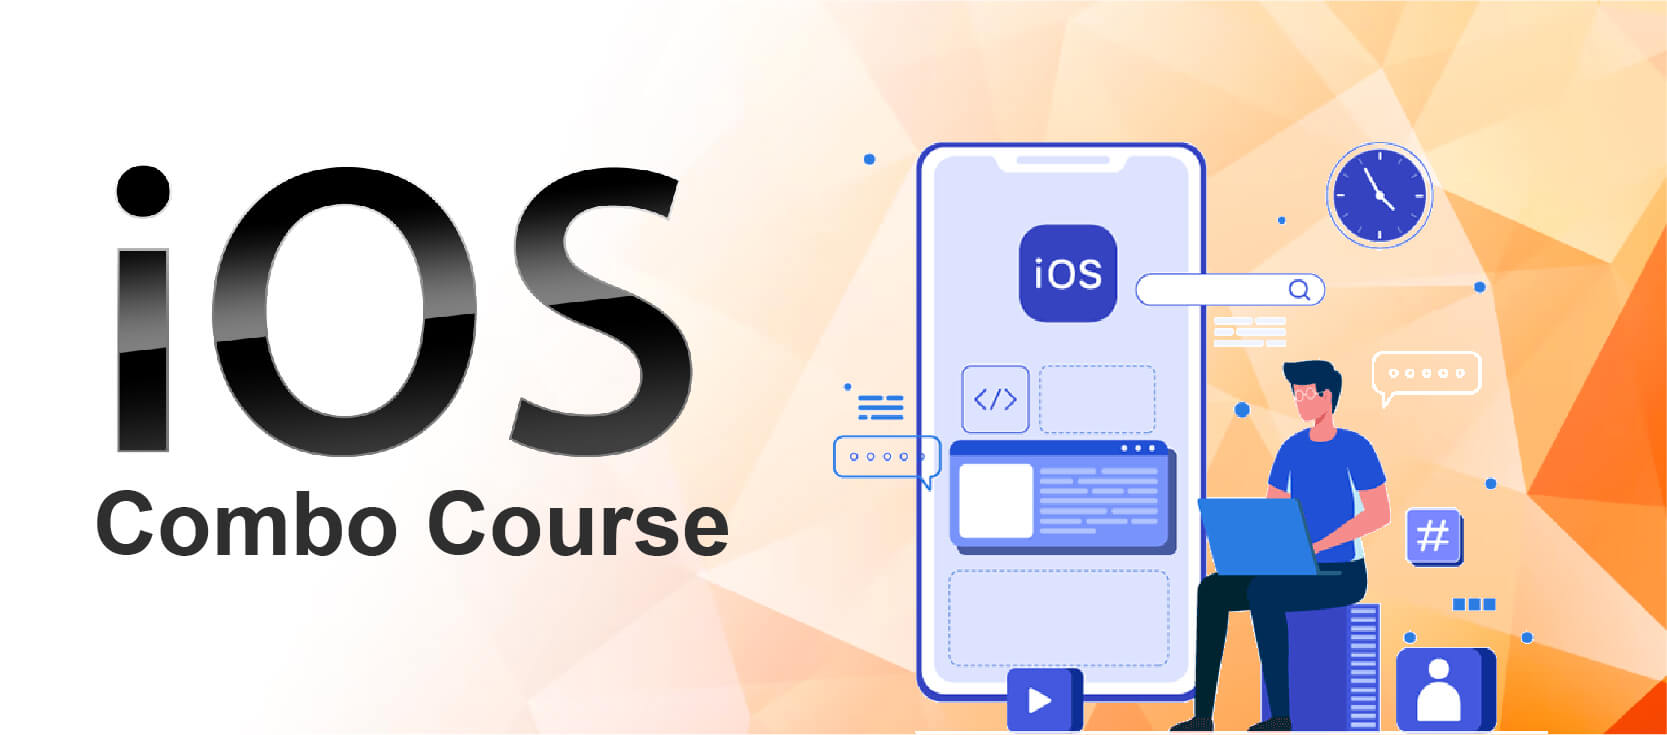 Combo Course in iOS